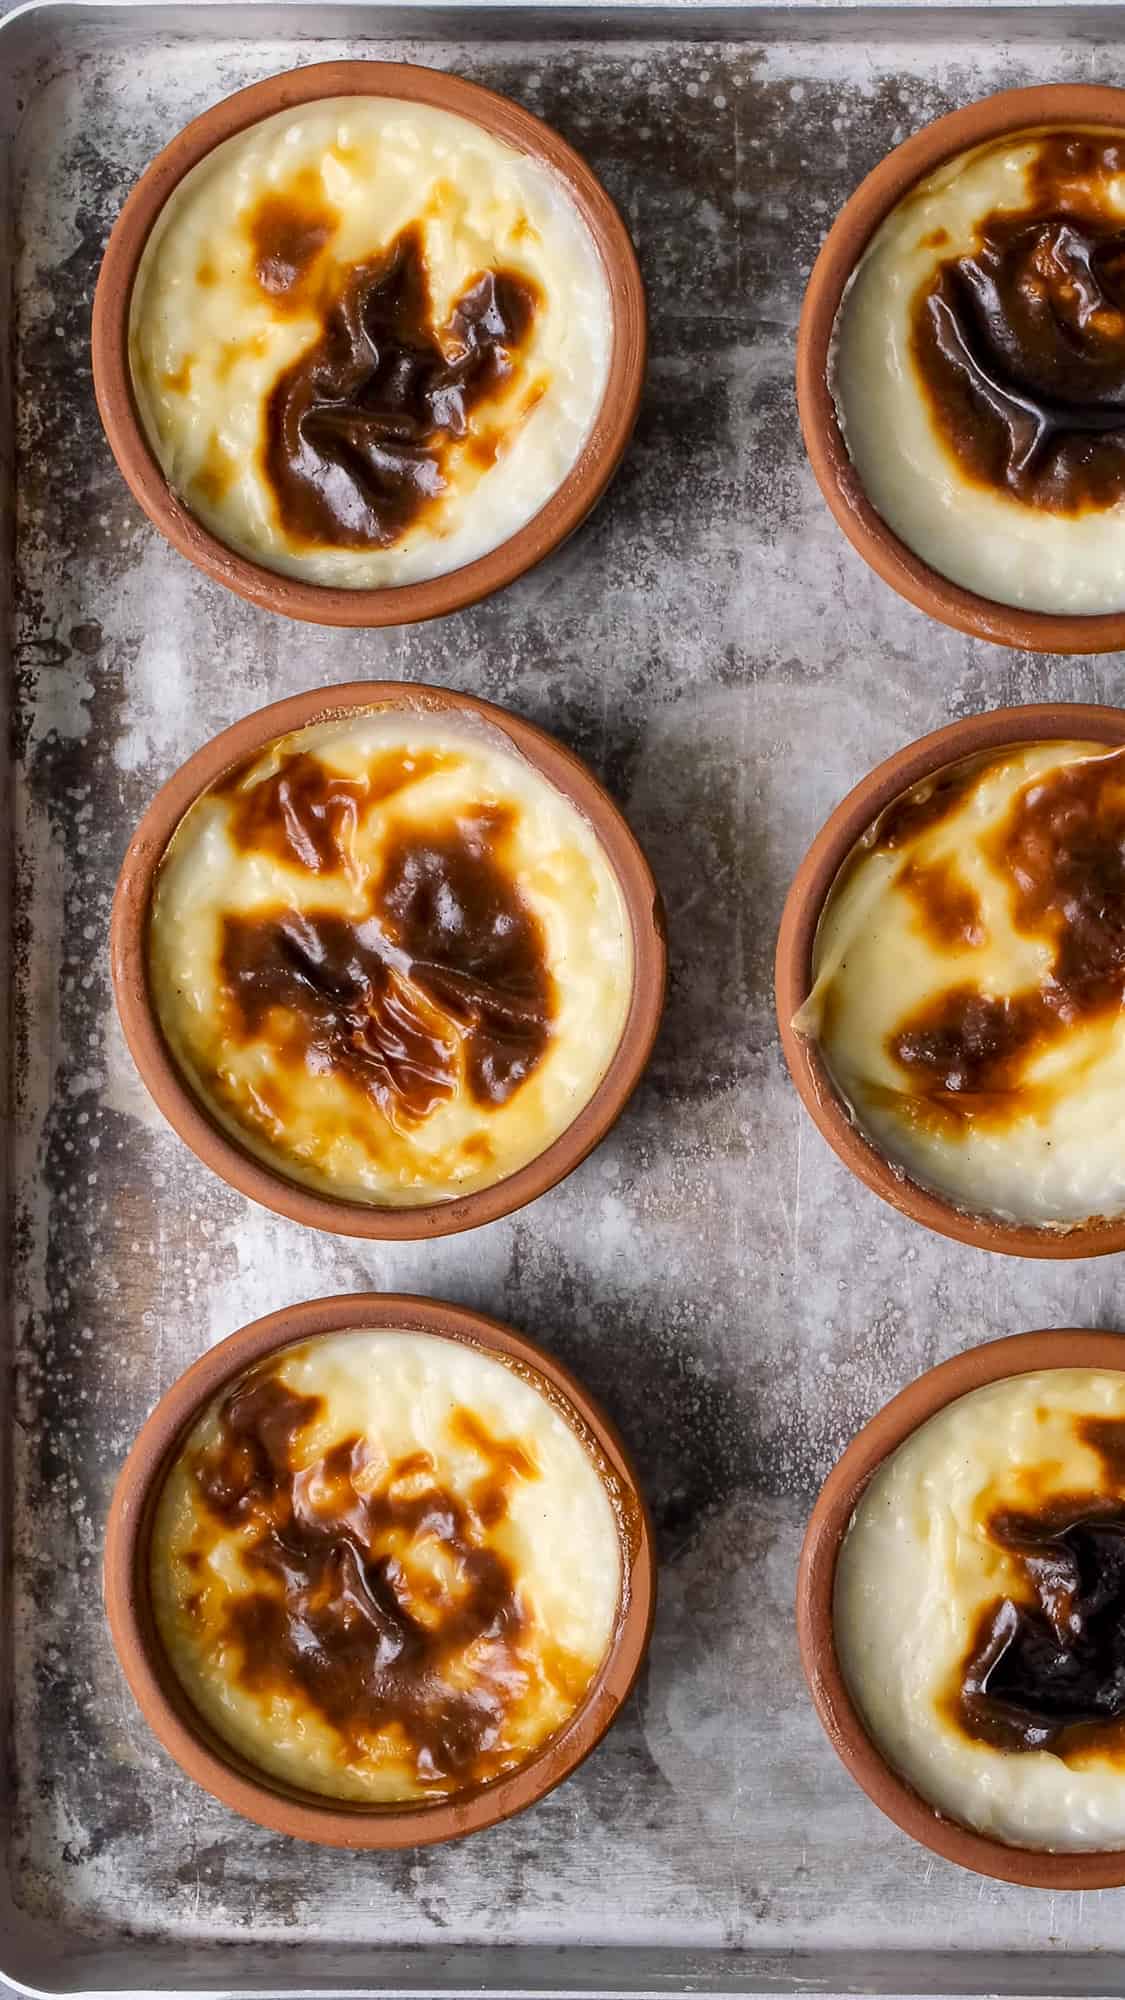 Turkish style rice pudding in clay pots.